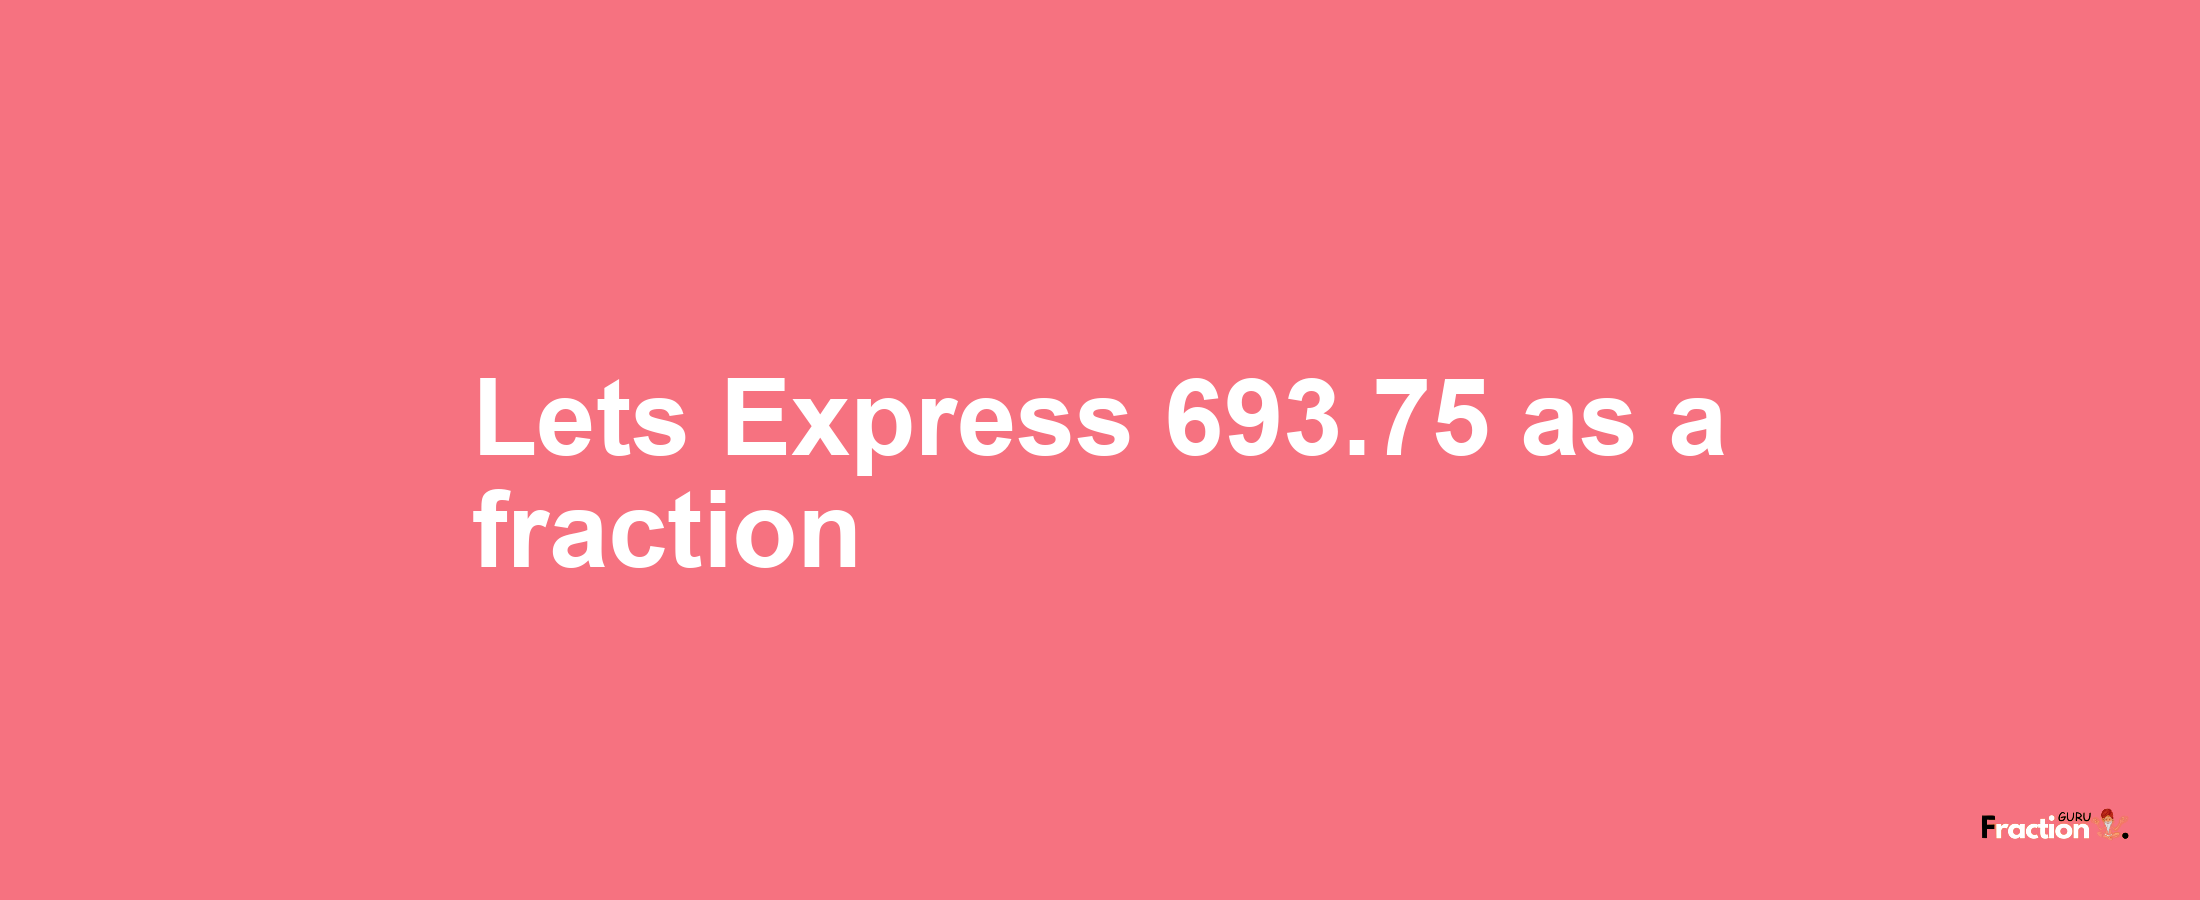 Lets Express 693.75 as afraction